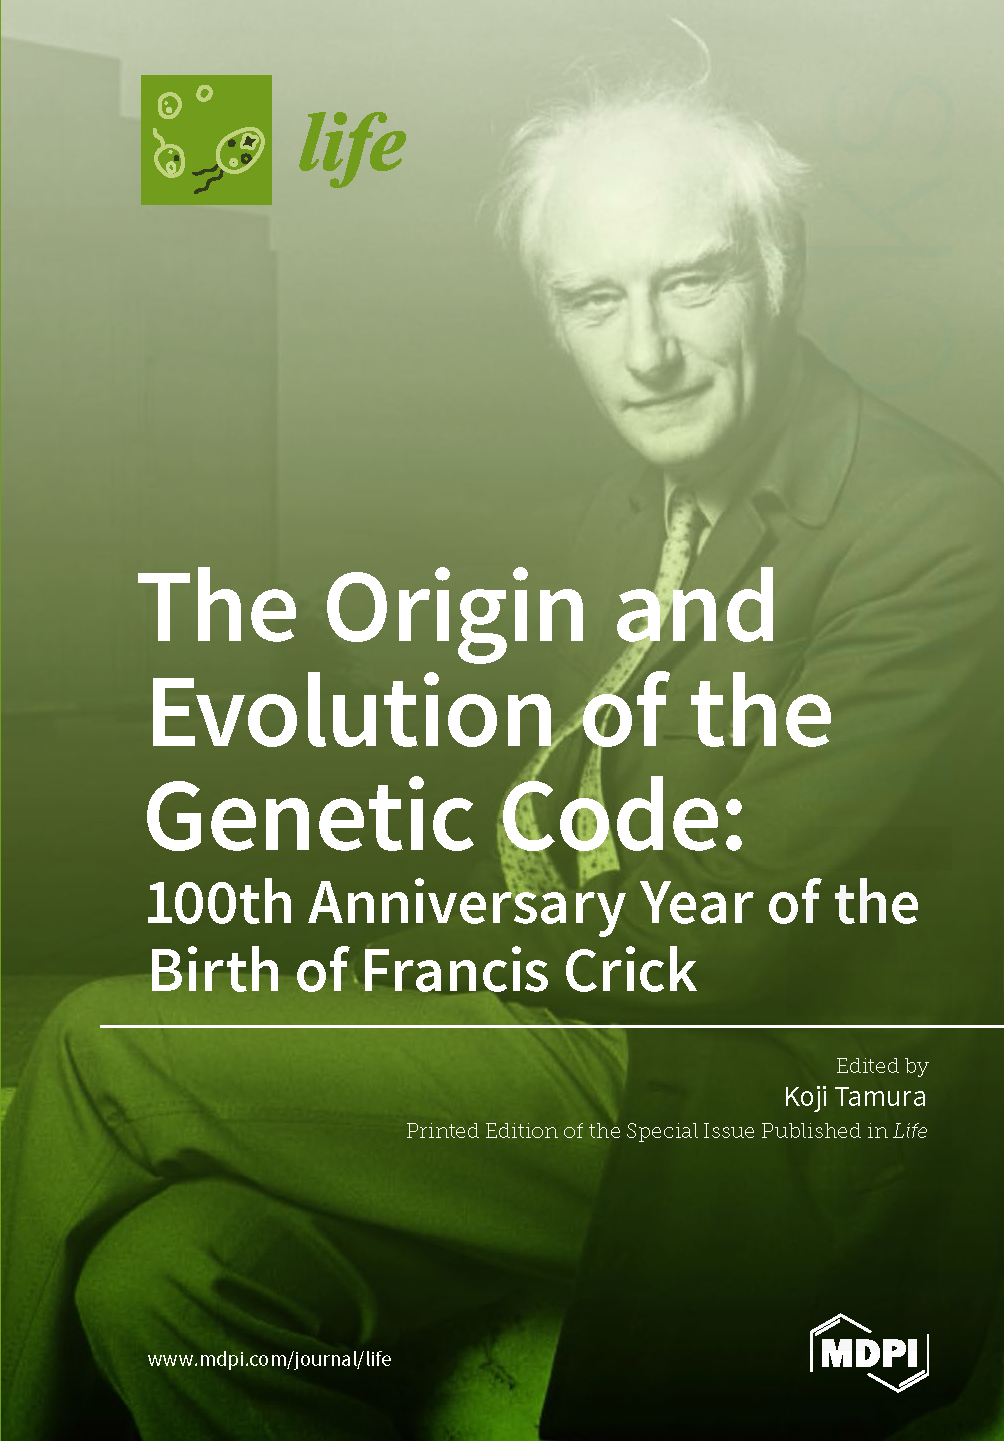 The Origin and Evolution of the Genetic Code: 100th Anniversary Year of the Birth of Francis Crick